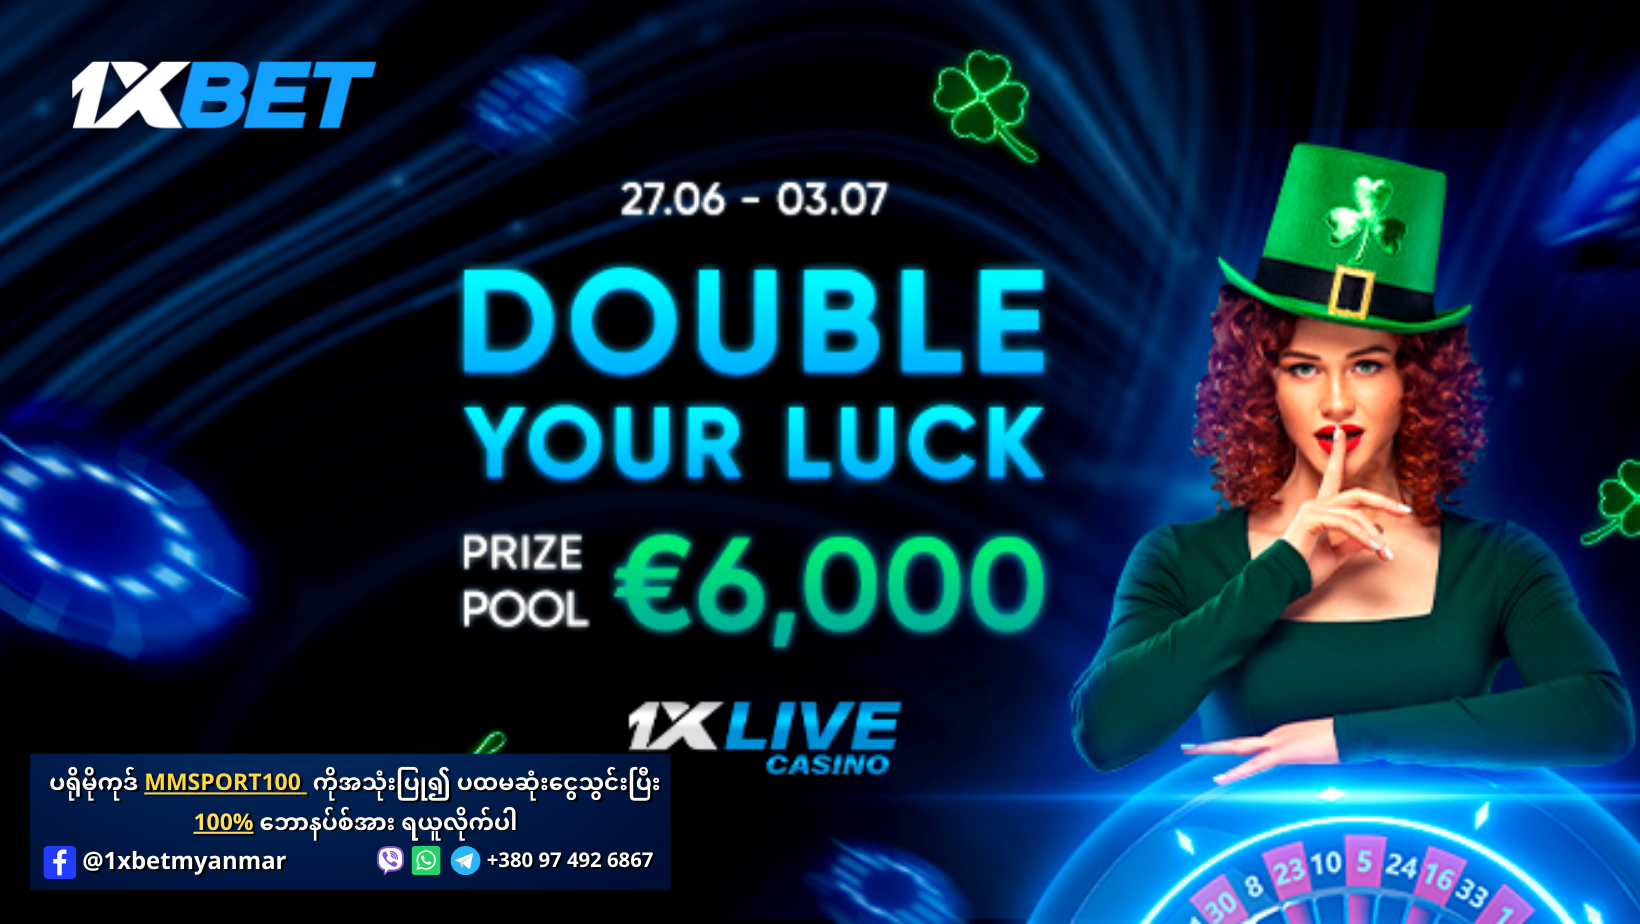 1xBet Double Your Luck Promotion